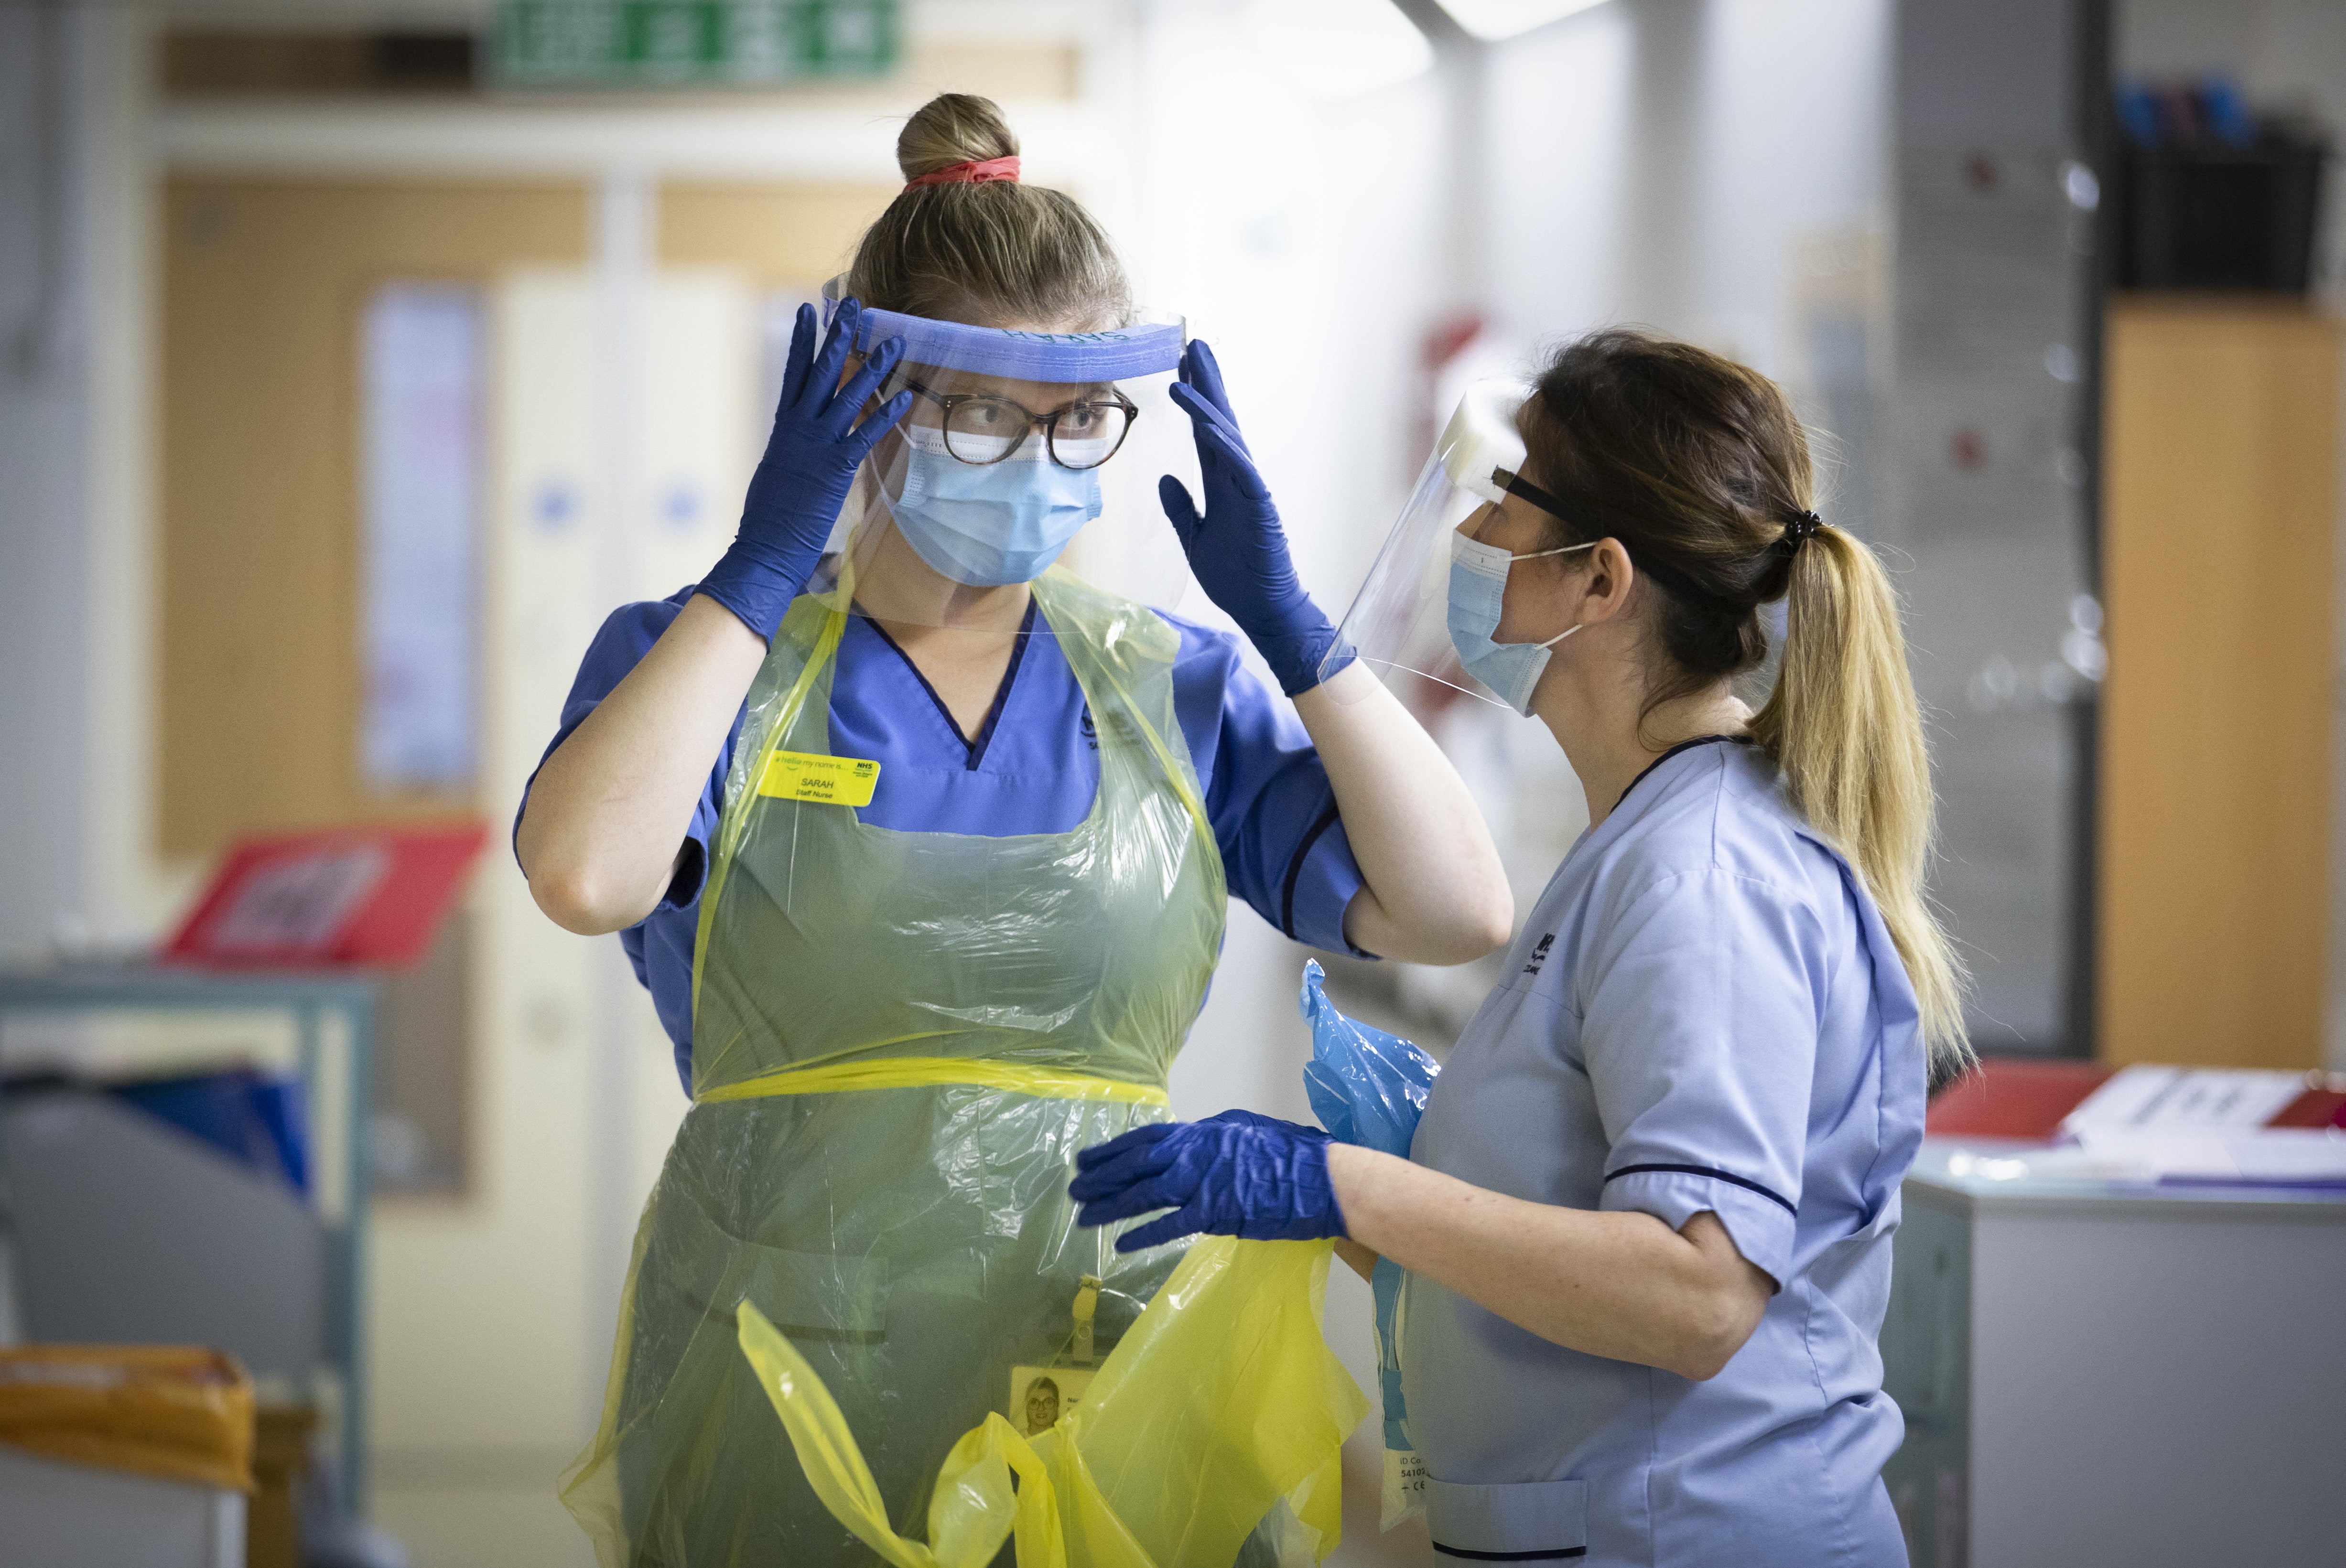 There are particular concerns about nursing staff (Jane Barlow/PA)